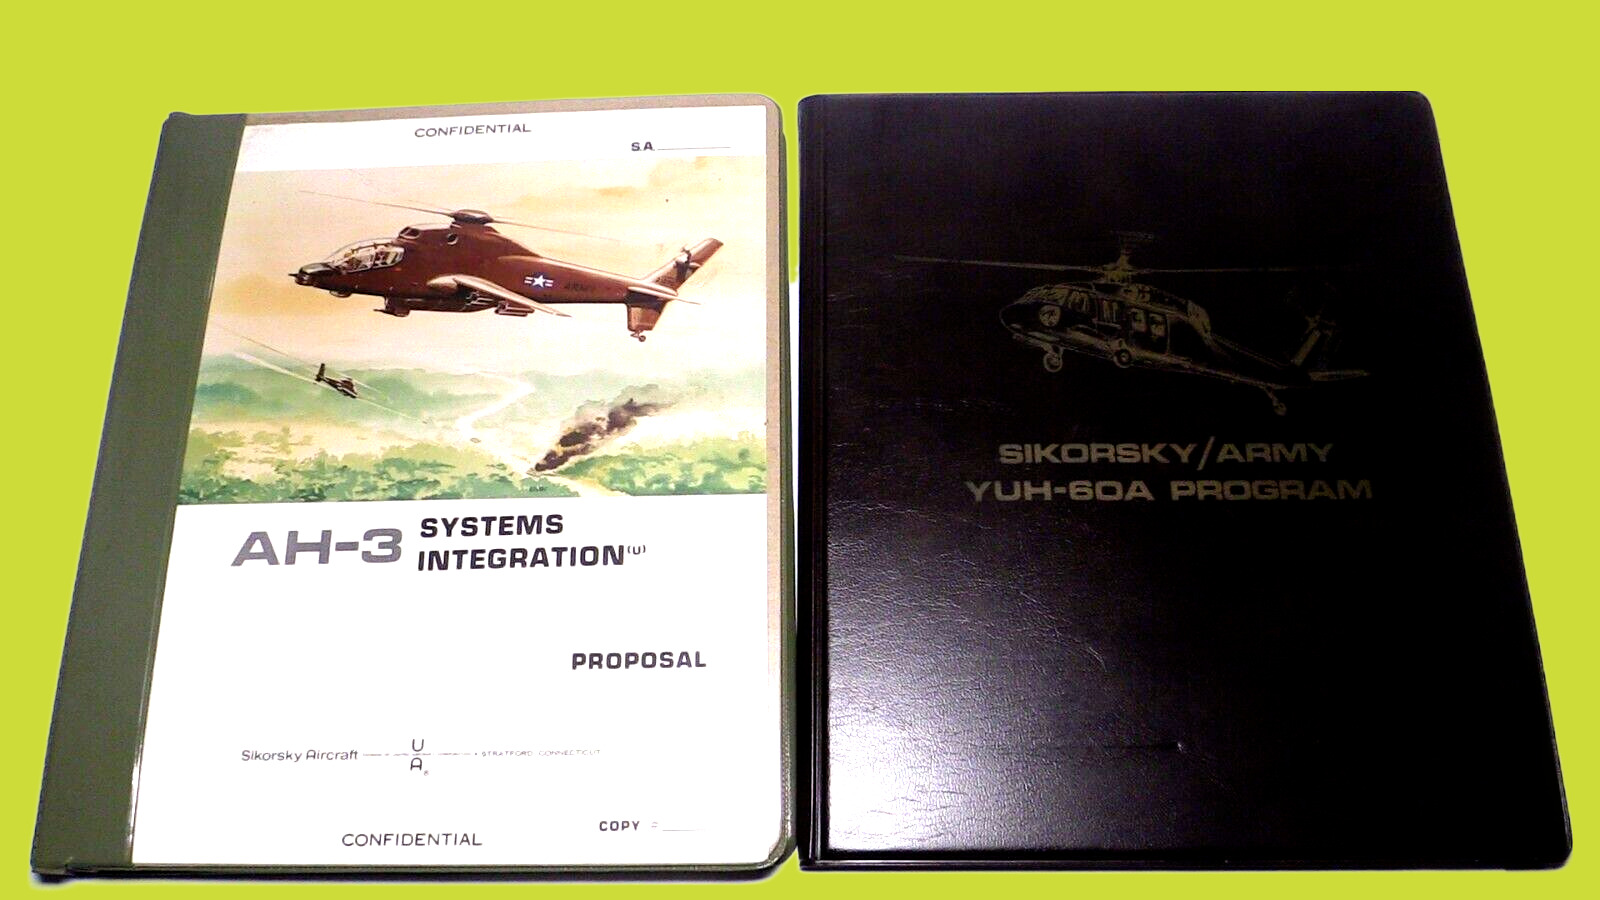 Lot of 2 Vtg. Sikorsky Aircraft military books -AH-3 Systems Integration YUH-60A